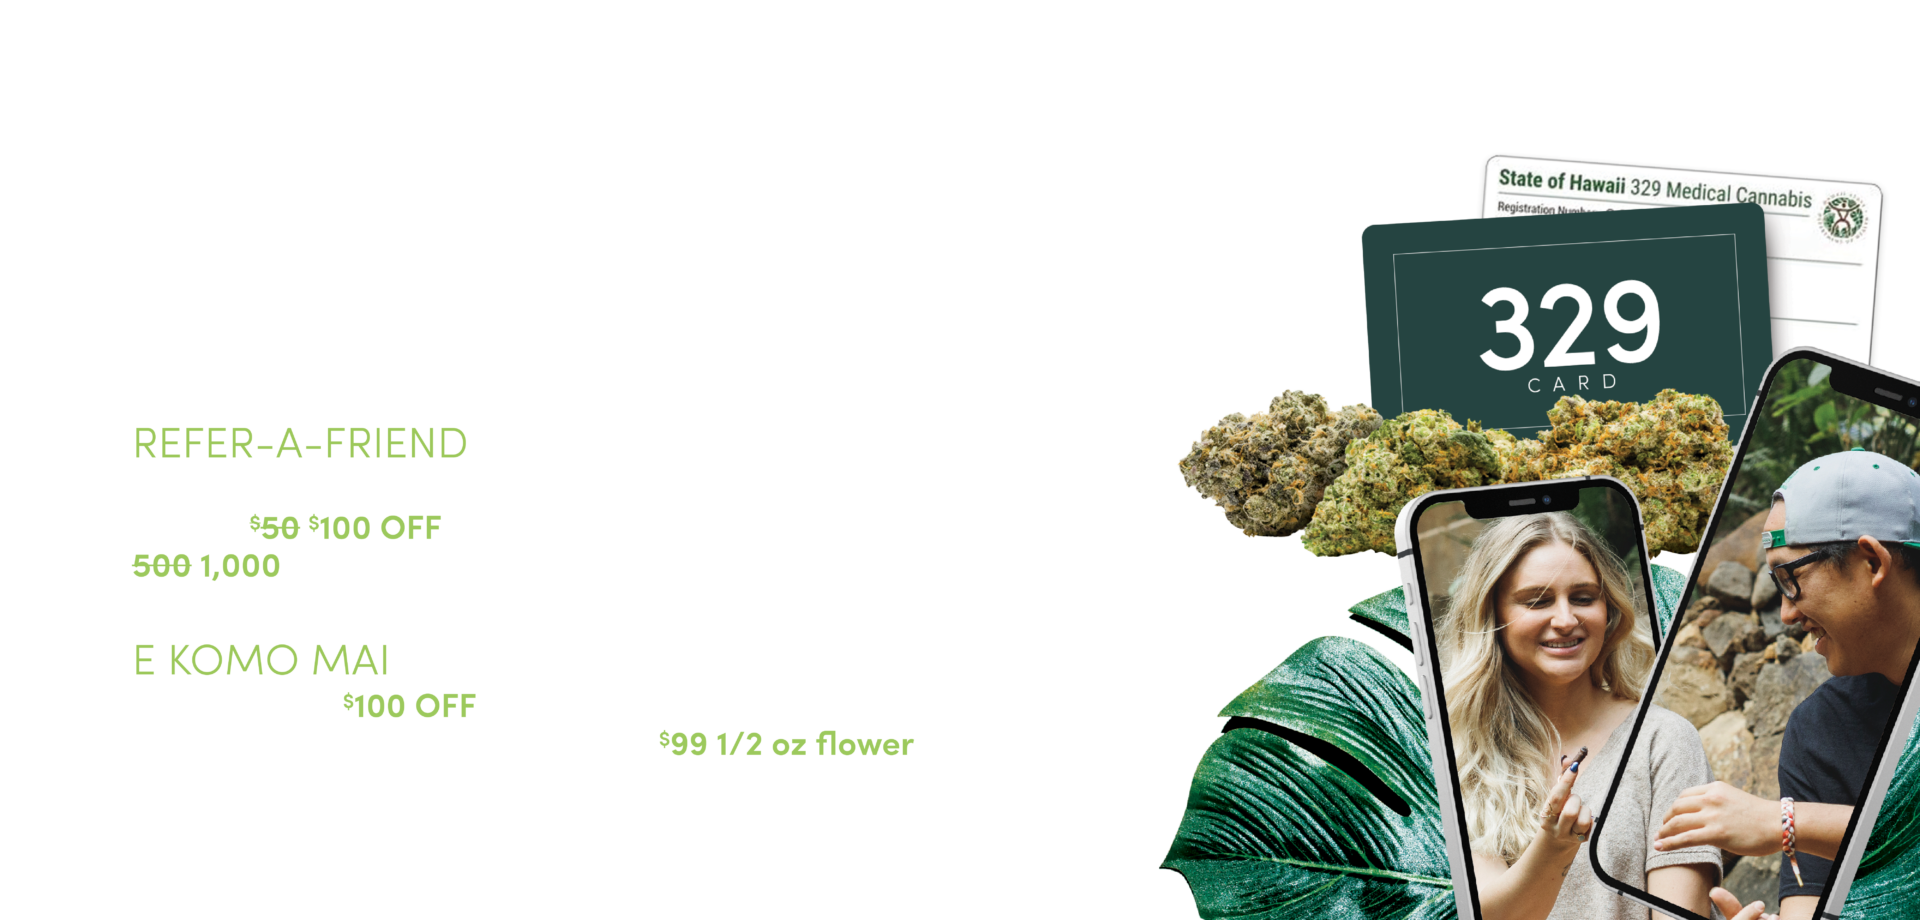 Medical cannabis holiday specials for new patients.